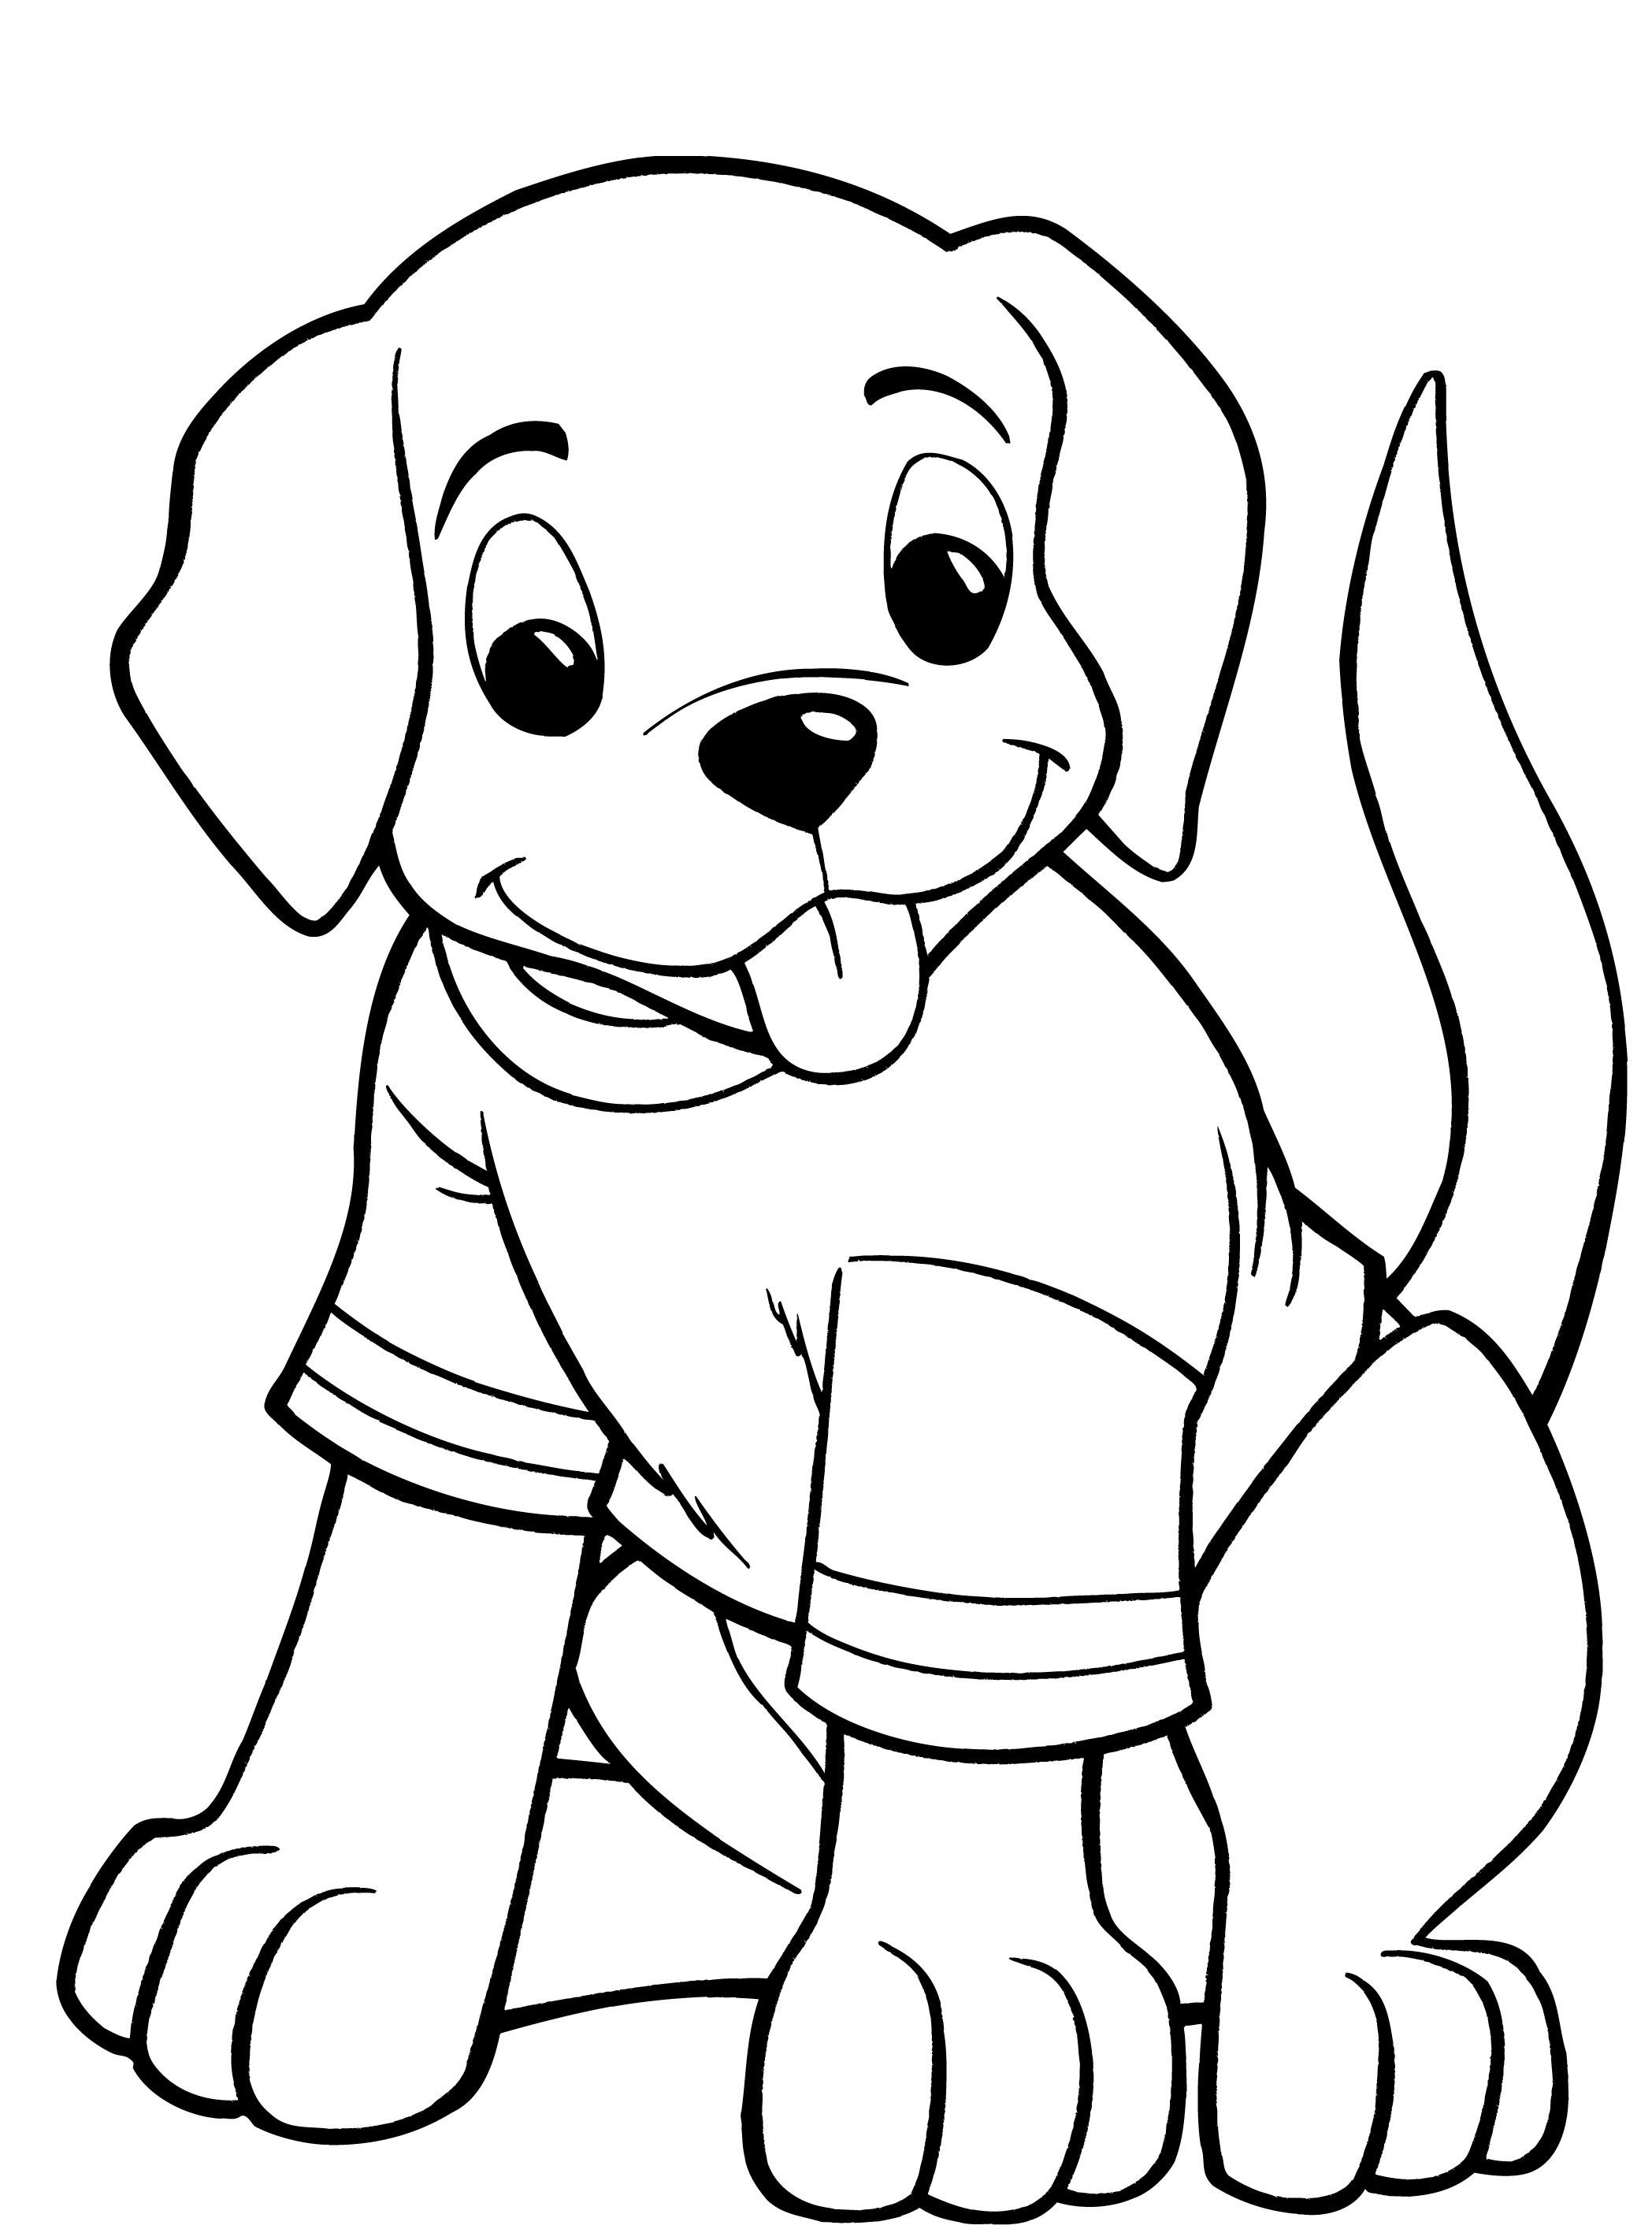 Dog Coloring Pages For Kids - Preschool Crafts